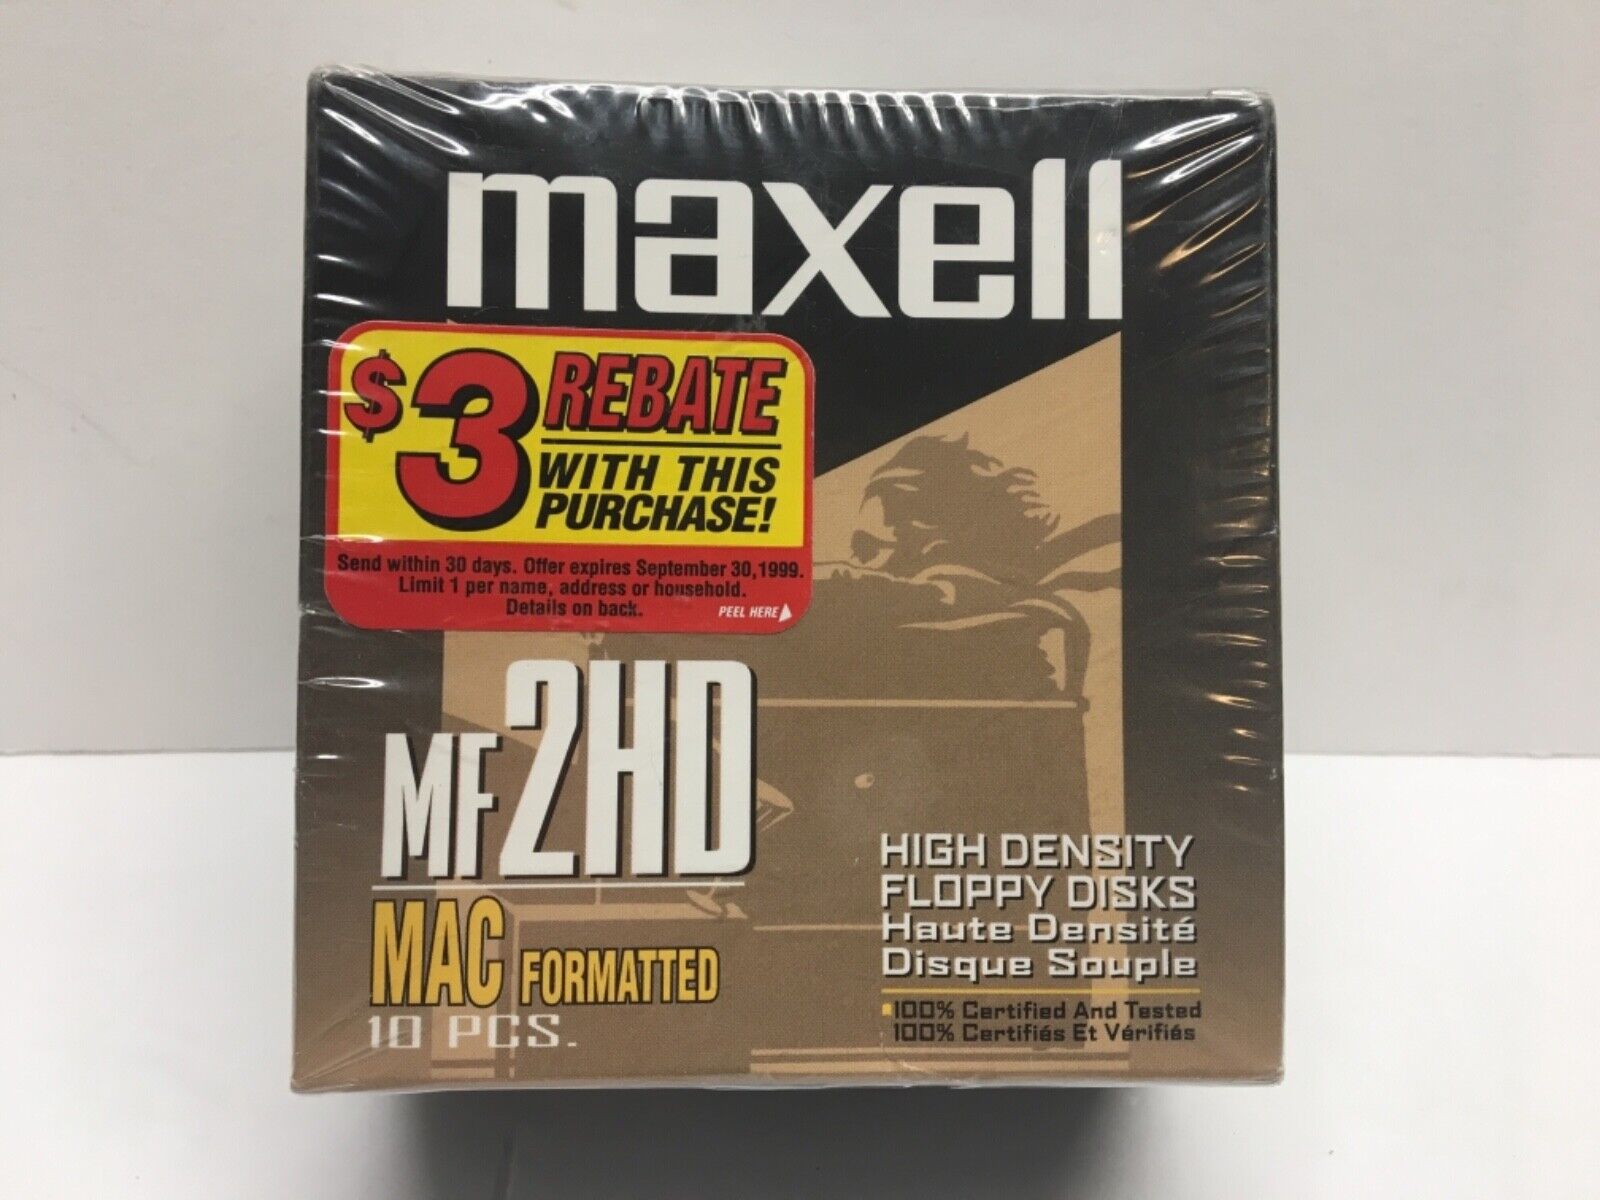 Maxell MF 2HD High Density Floppy Disks 10 pack SEALED Vintage MAC Formatted